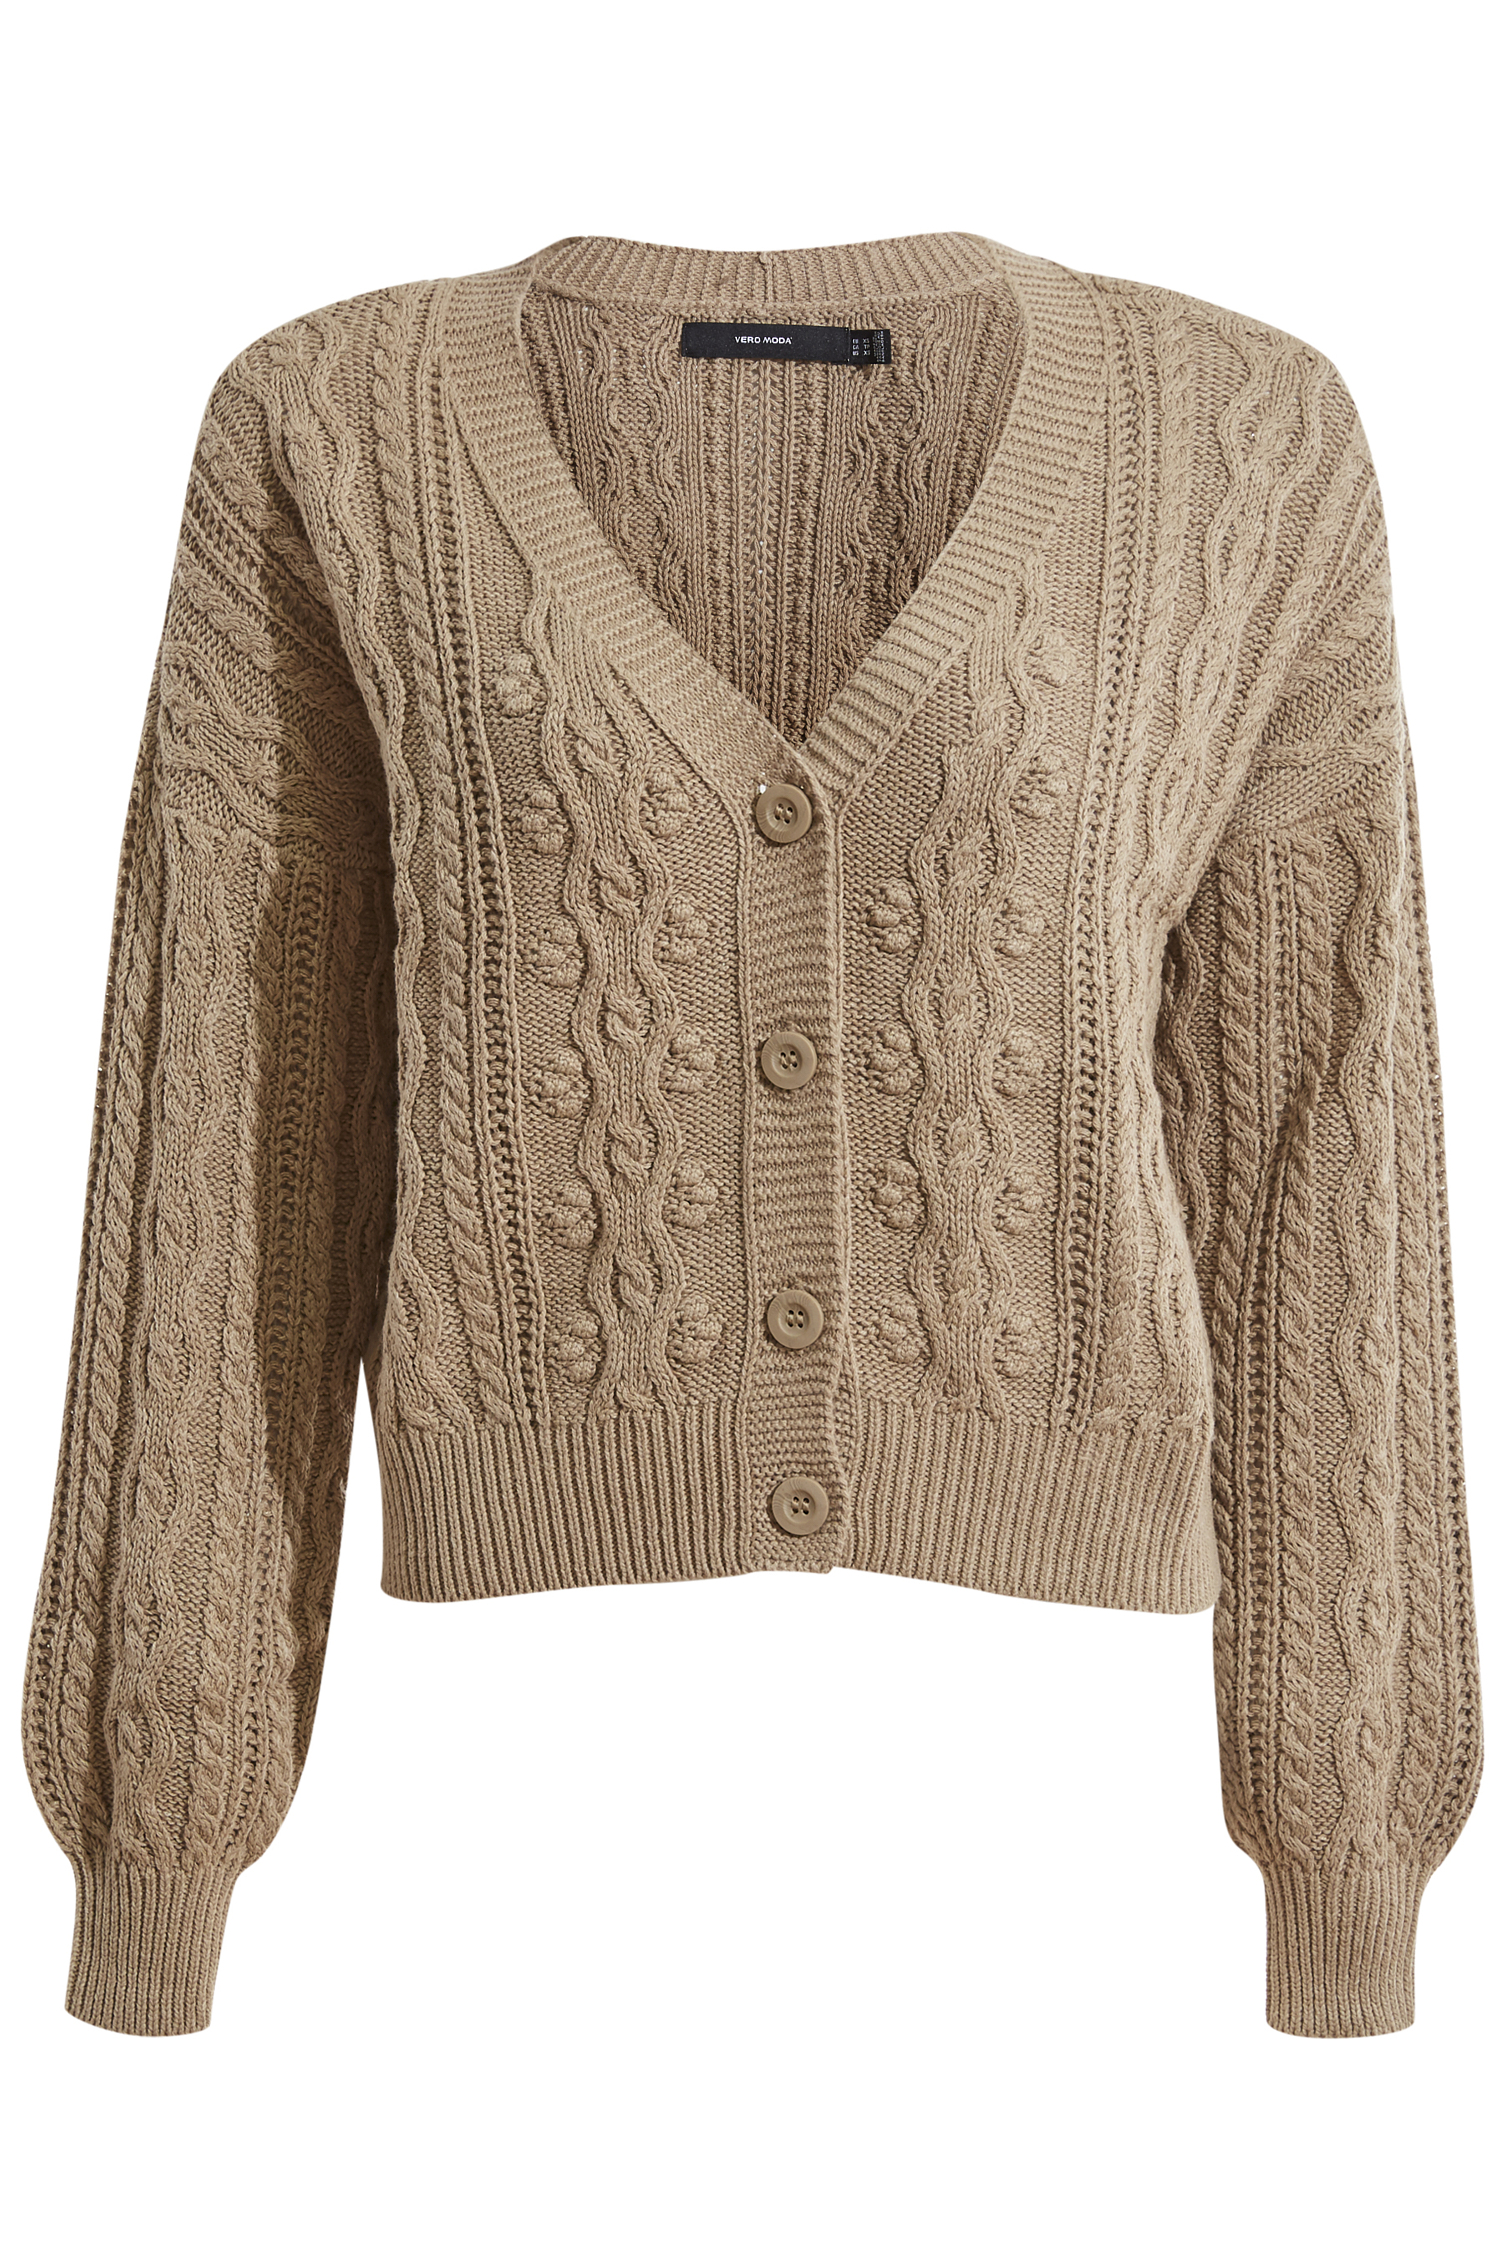 | Knit Taupe DAILYLOOK in Cardigan